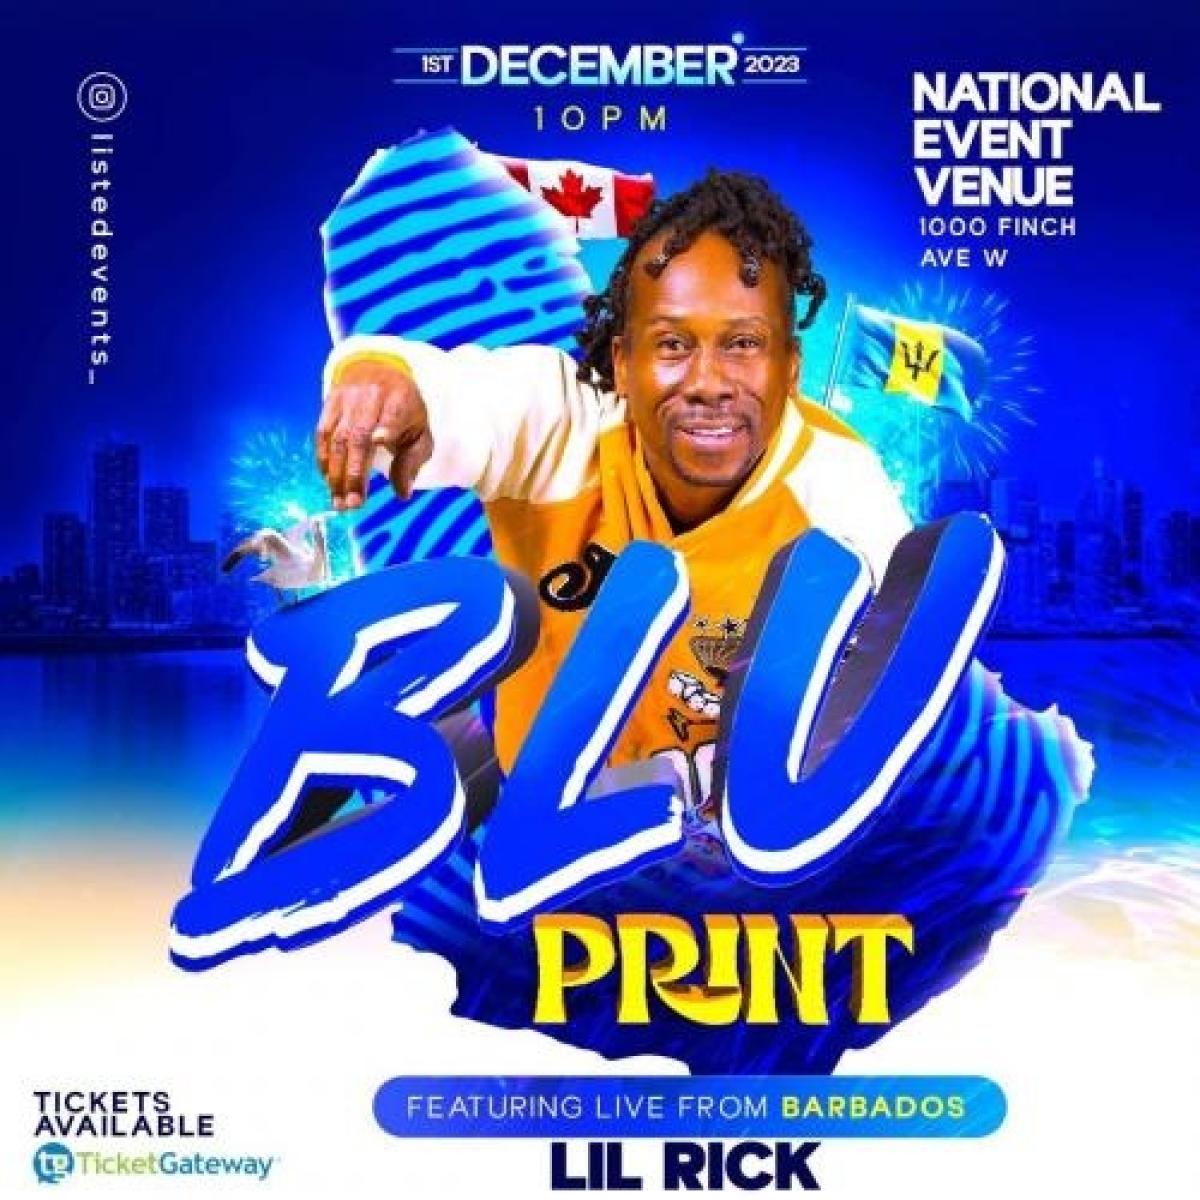 Blu Print flyer or graphic.